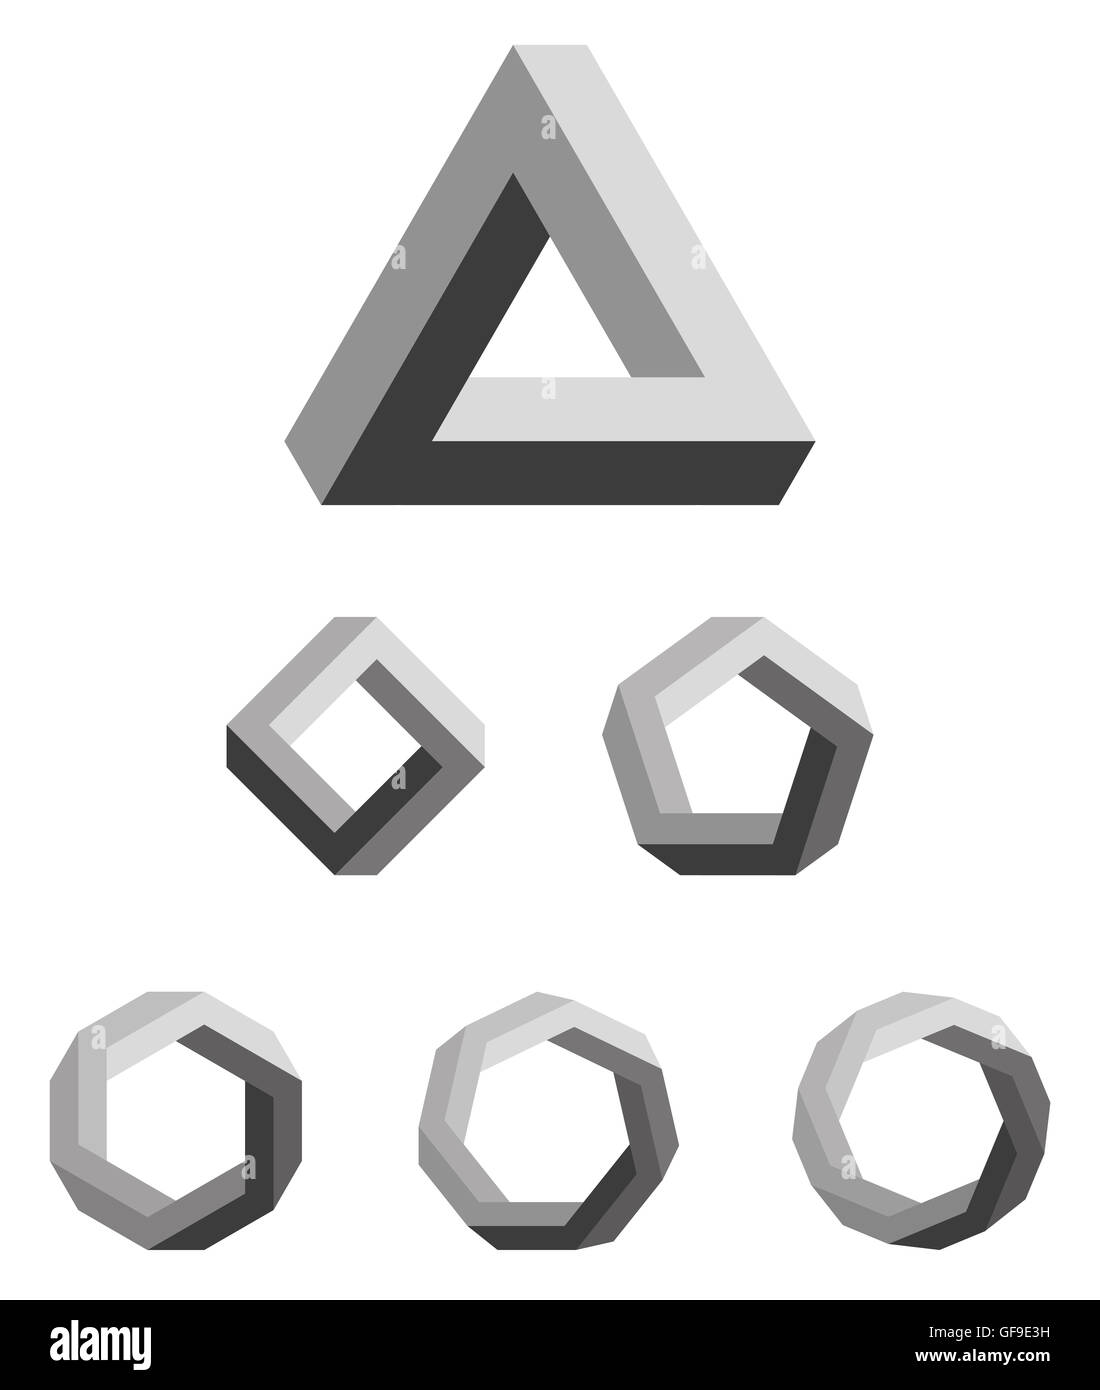 Penrose triangle and polygons gradated black. Penrose tribar, an impossible object, appears to be a solid object. Stock Photo